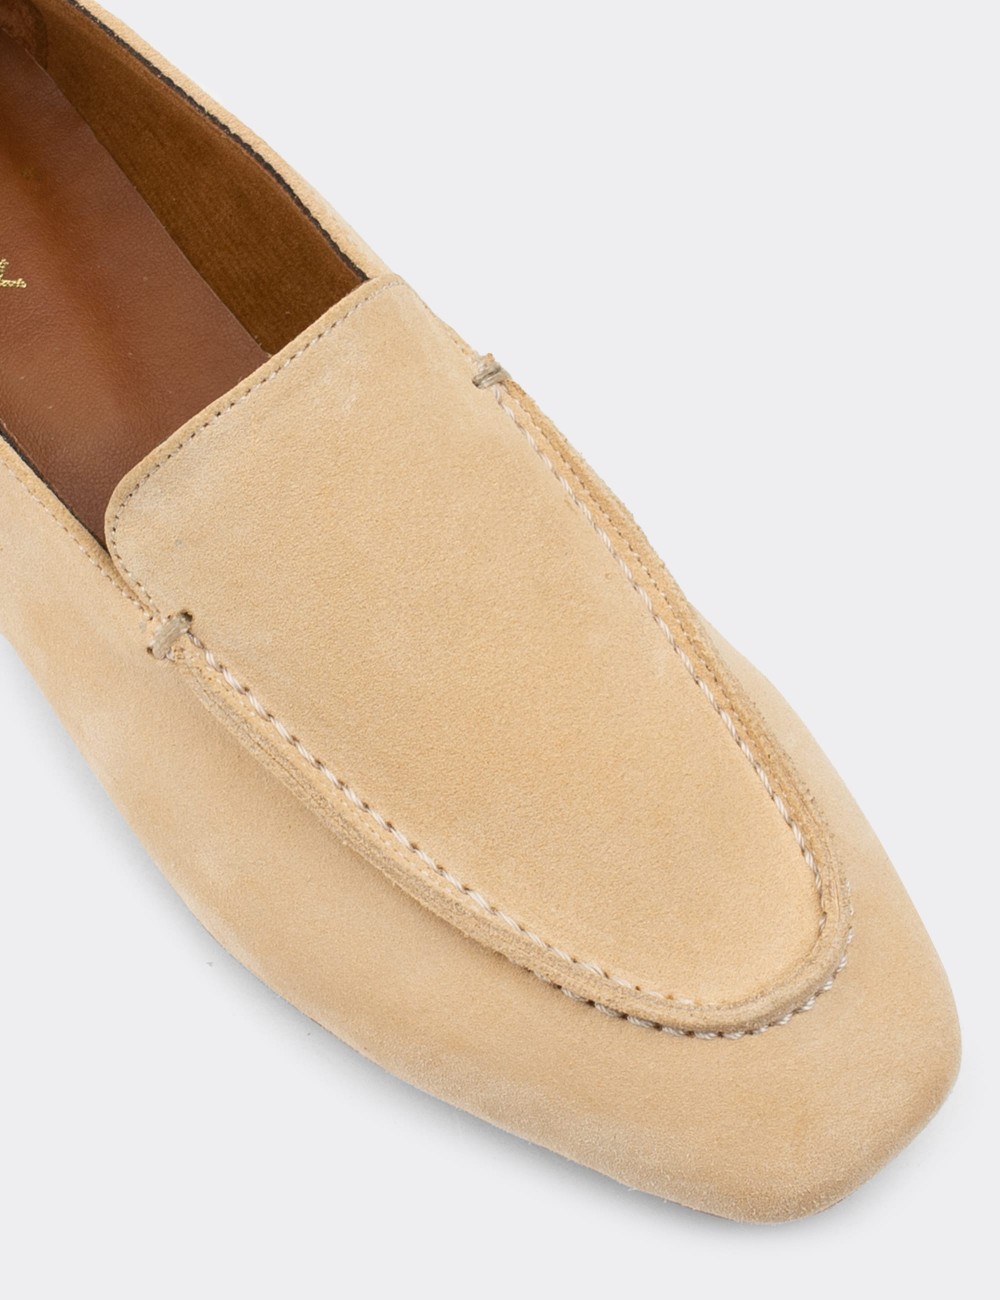 Beige Suede Leather Loafers - 01990ZBEJC01